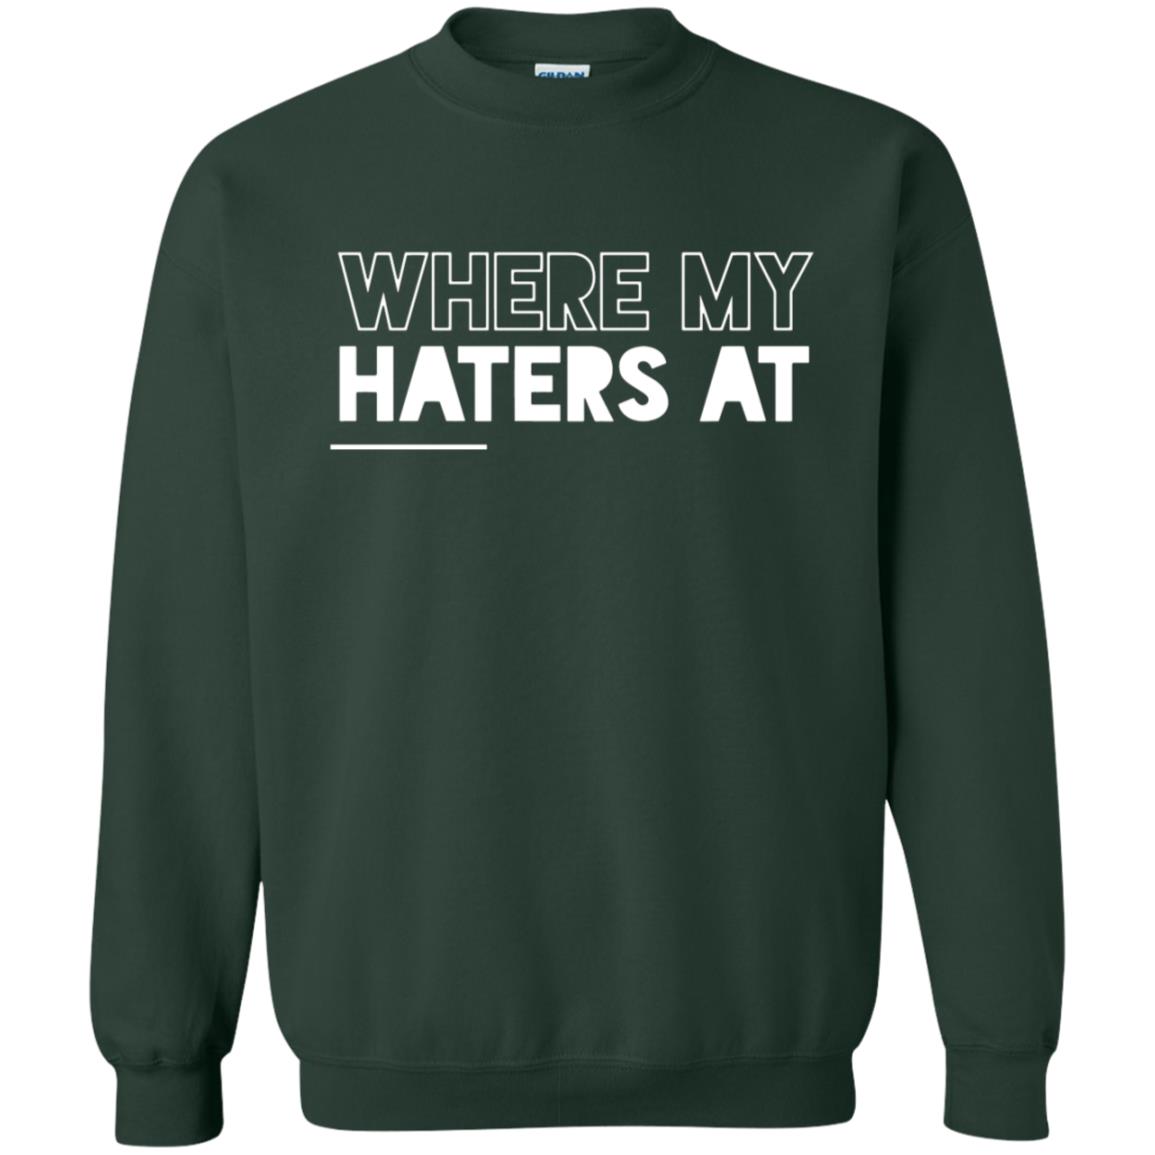 Haters T Shirt - 10% Off - FavorMerch